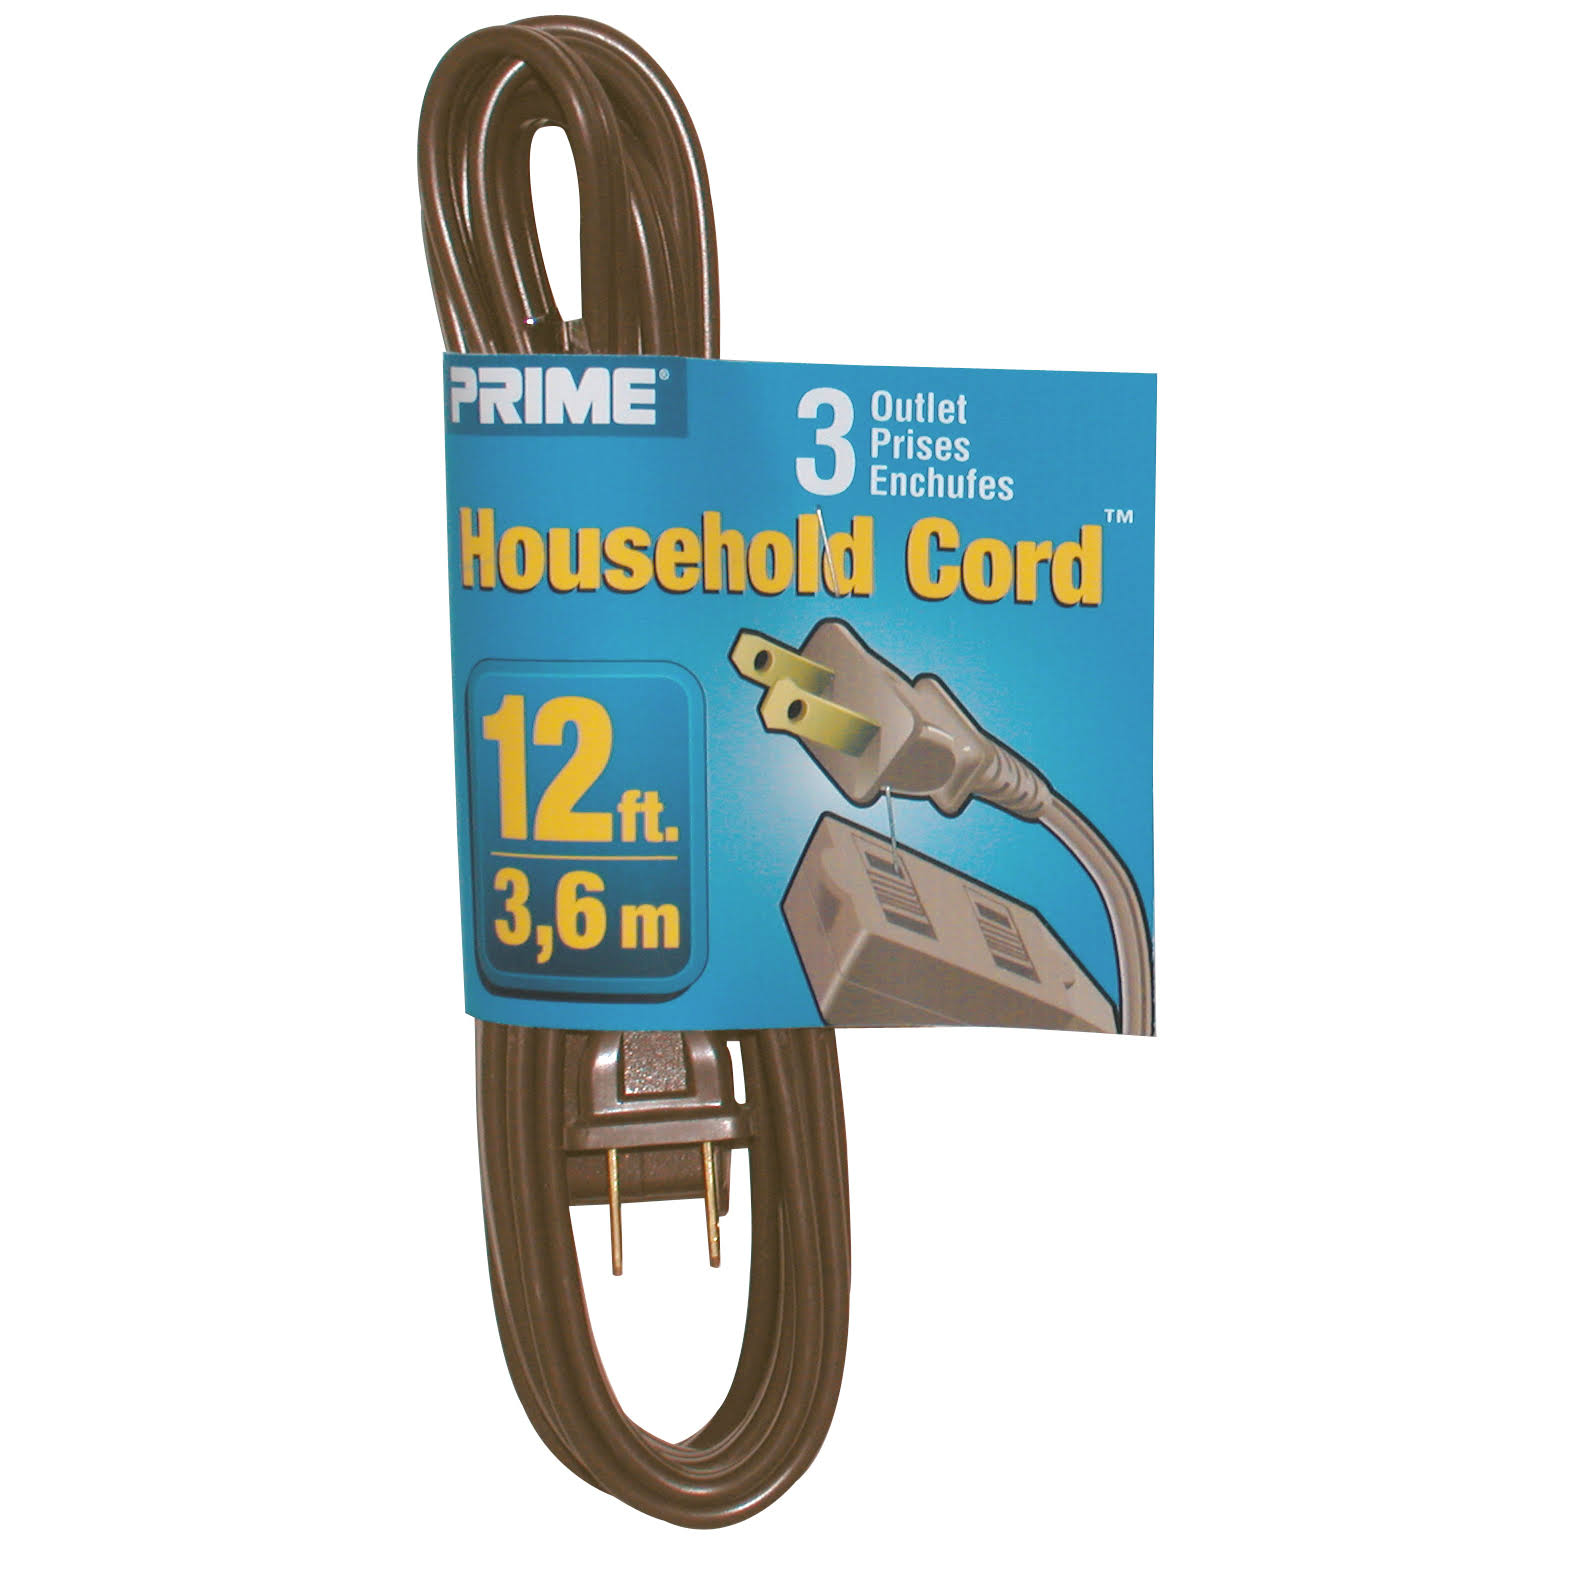 Prime EC670612 Wire and Cable - Brown, 12'